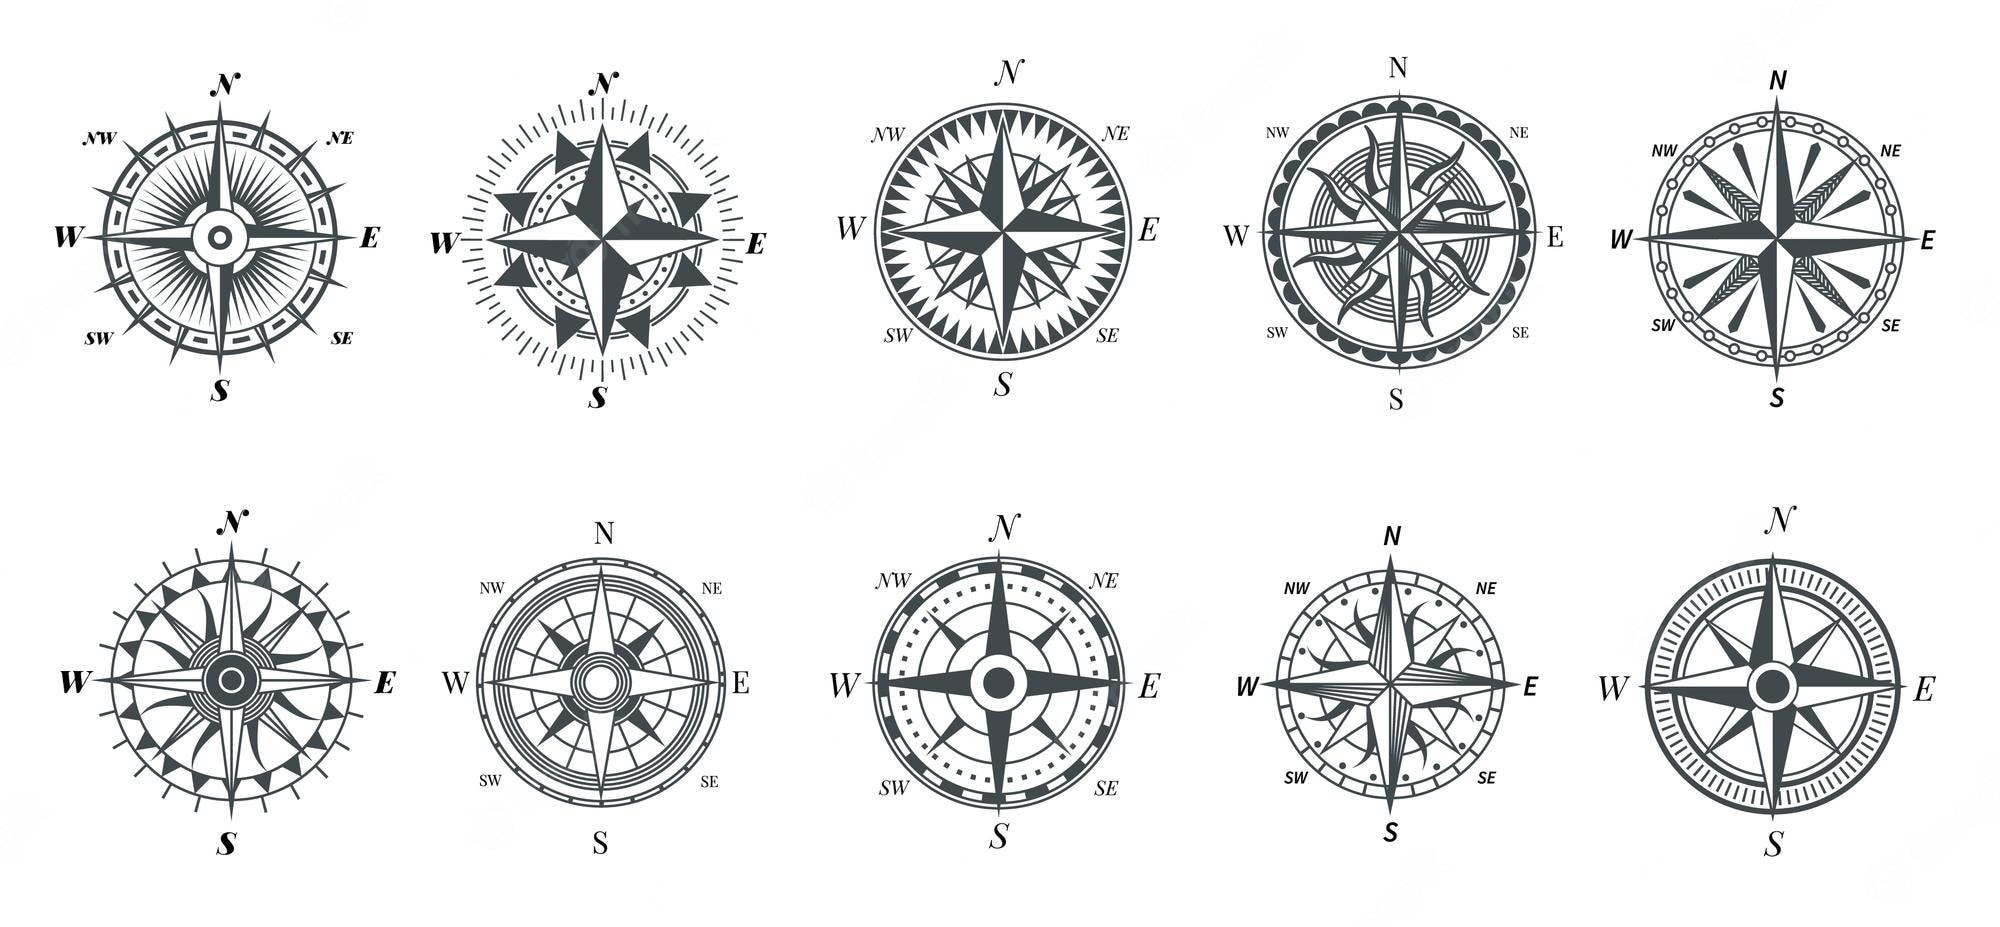 Compass rose Image. Free Vectors, & PSD